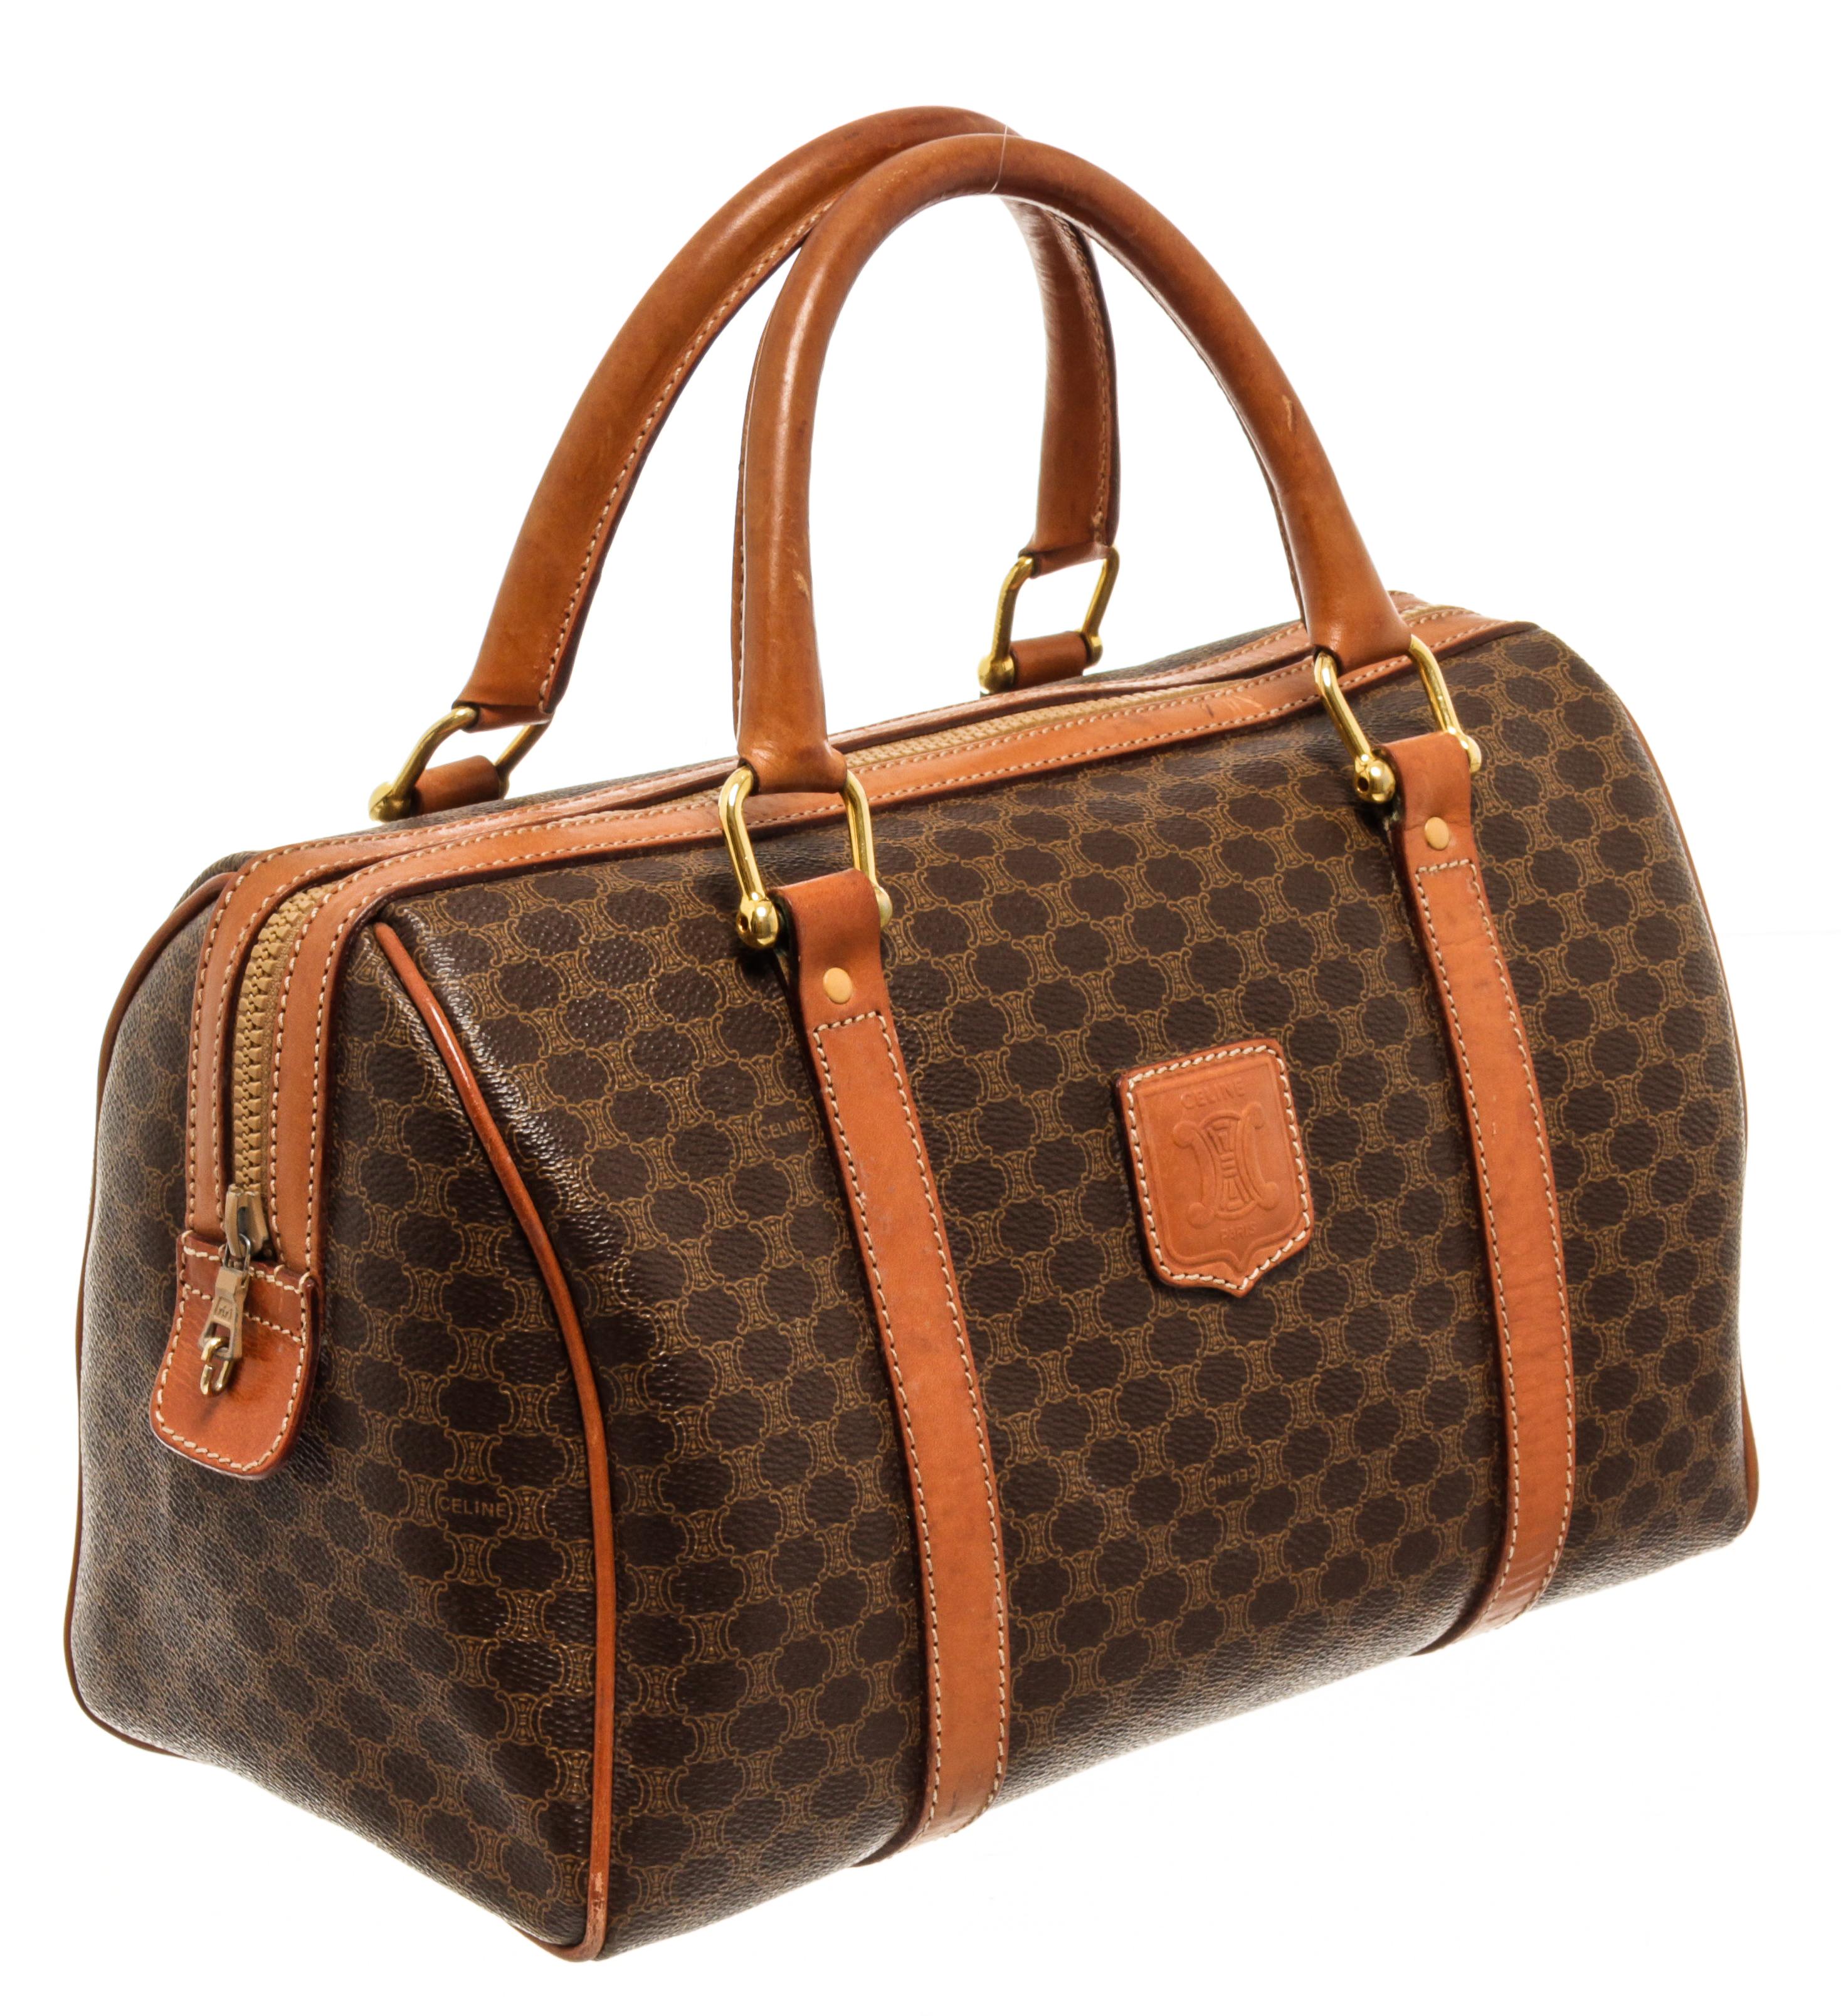 Celine vintage Boston Bag Macadam with Macadam coated canvas exterior, gold-tone hardware, brown leather lining, zip closure, and top handles.

83016MSC